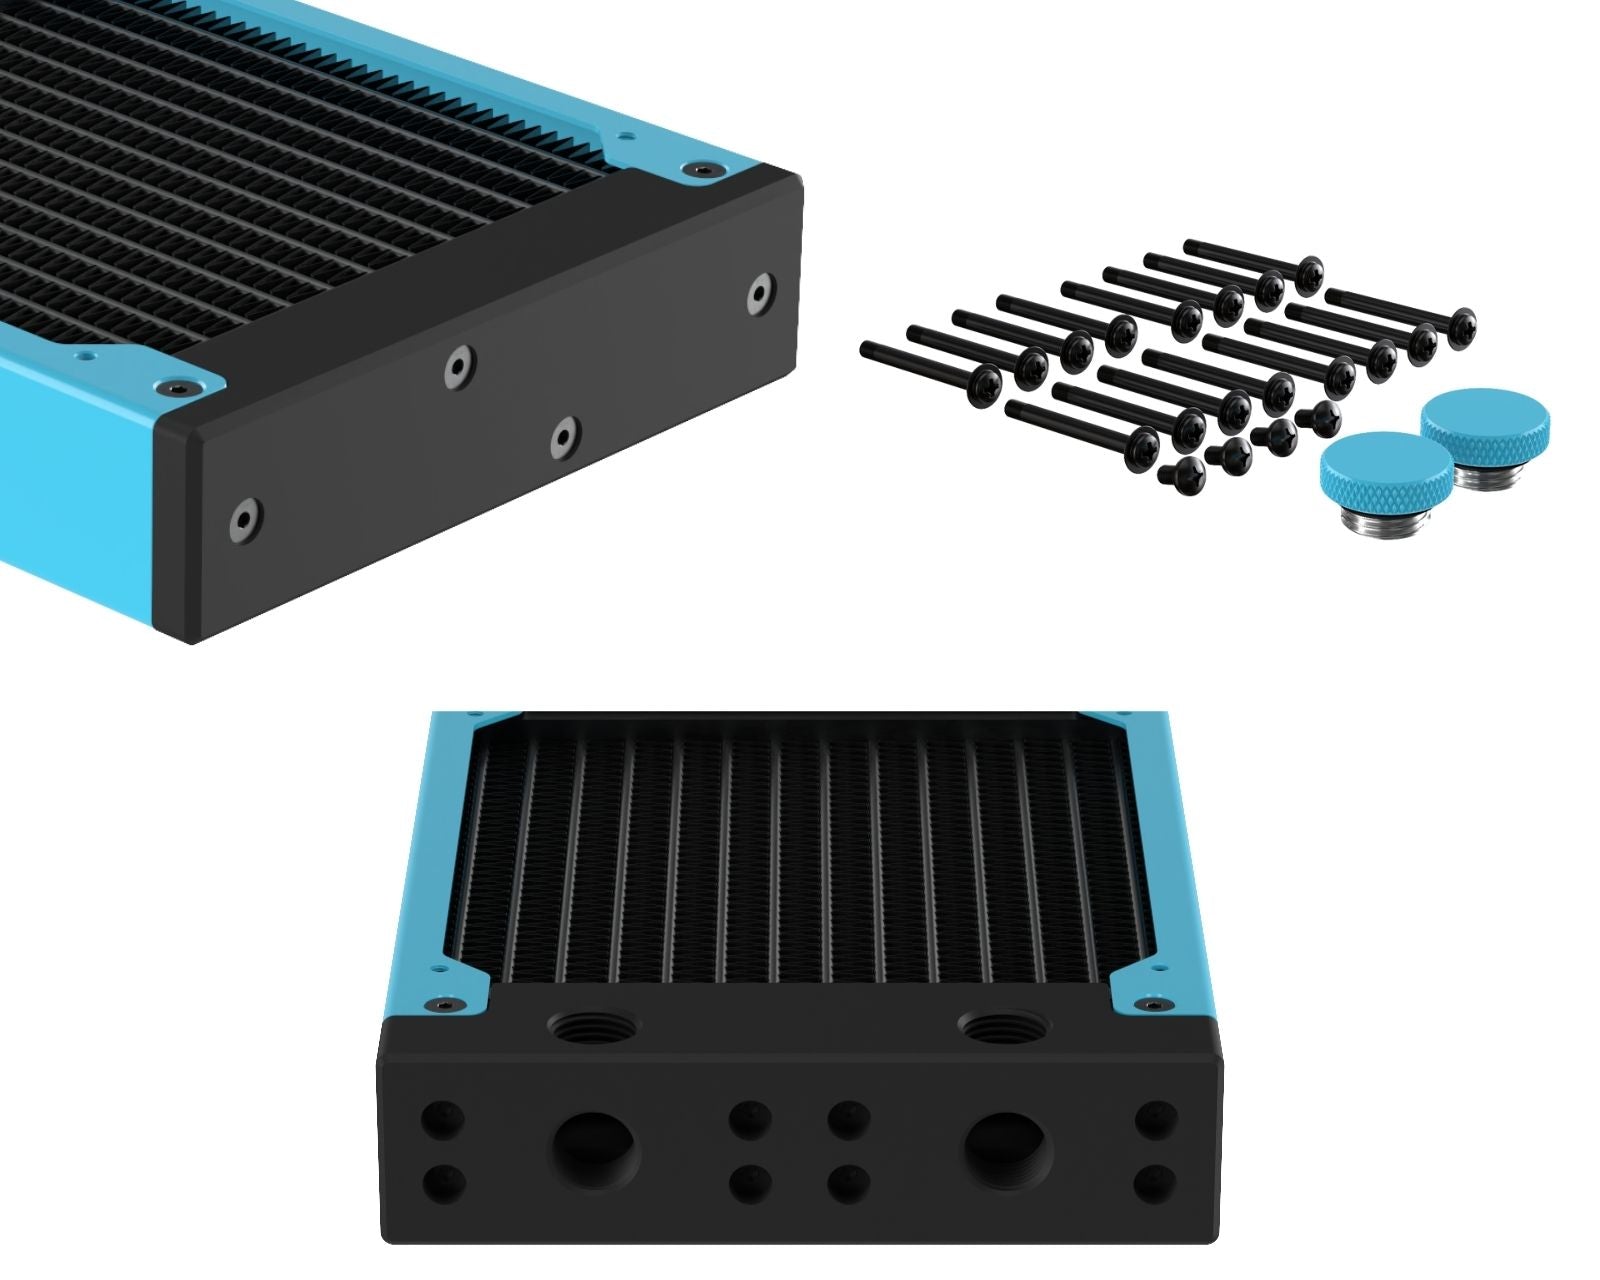 PrimoChill 480SL (30mm) EXIMO Modular Radiator, Black POM, 4x120mm, Quad Fan (R-SL-BK48) Available in 20+ Colors, Assembled in USA and Custom Watercooling Loop Ready - Sky Blue